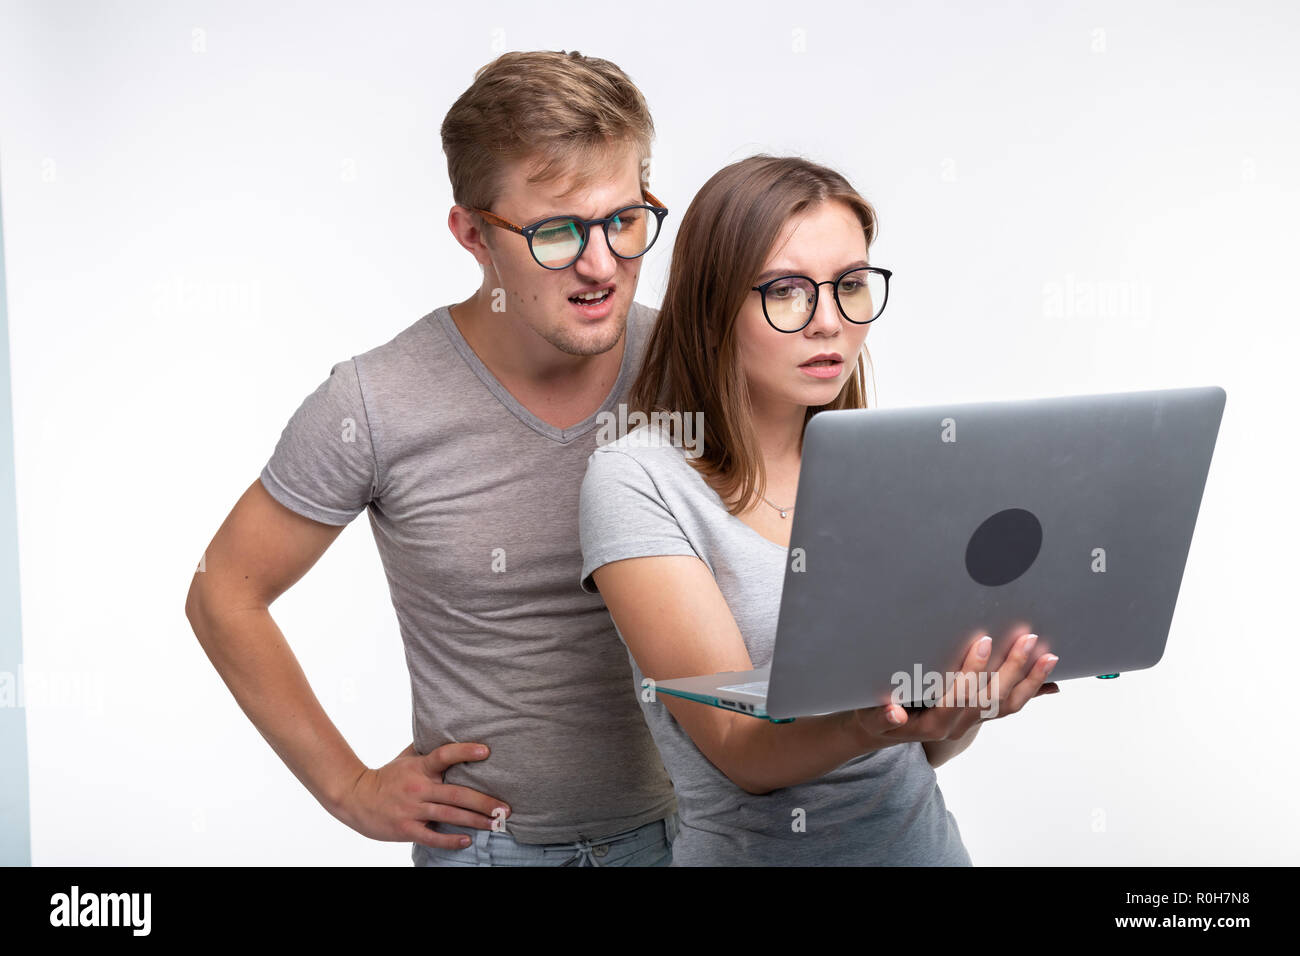 People and education concept - Two young student looking in laptop over white background Stock Photo